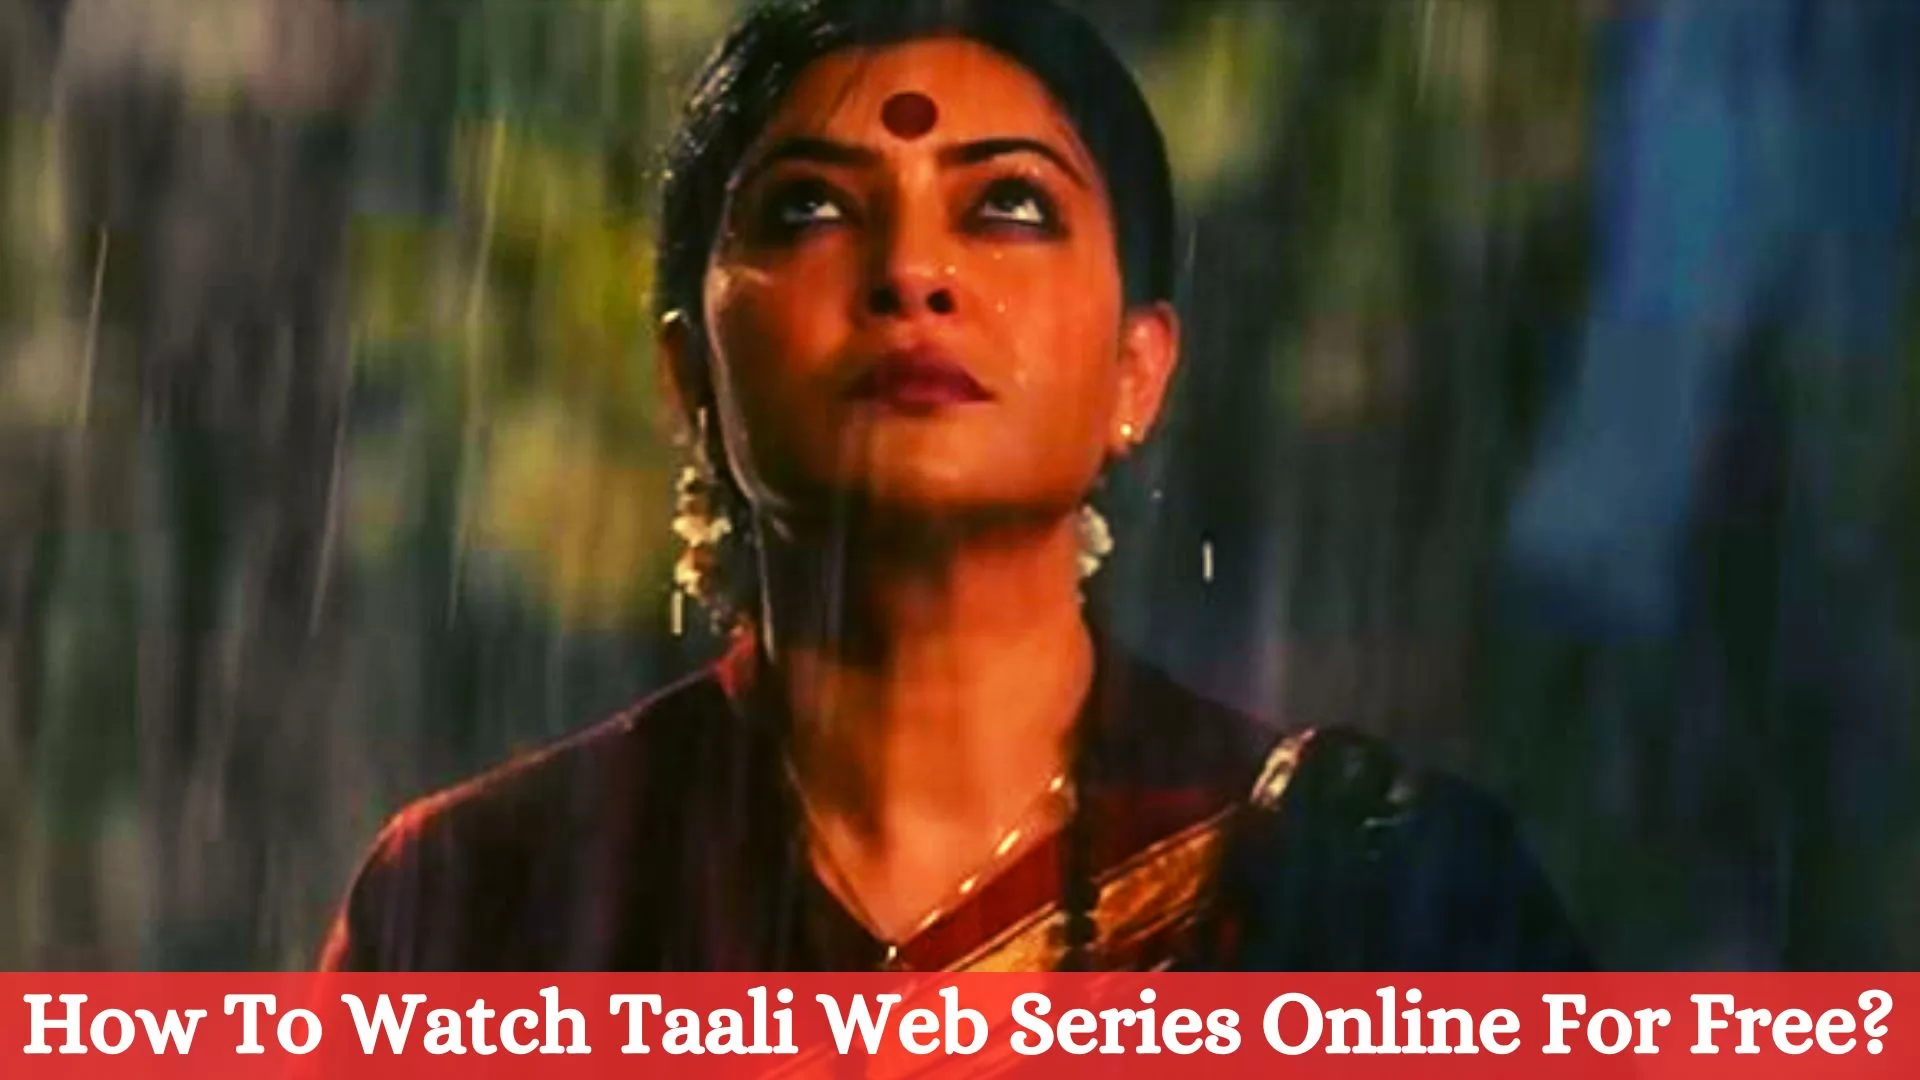 How To Watch Taali Web Series Online For Free?